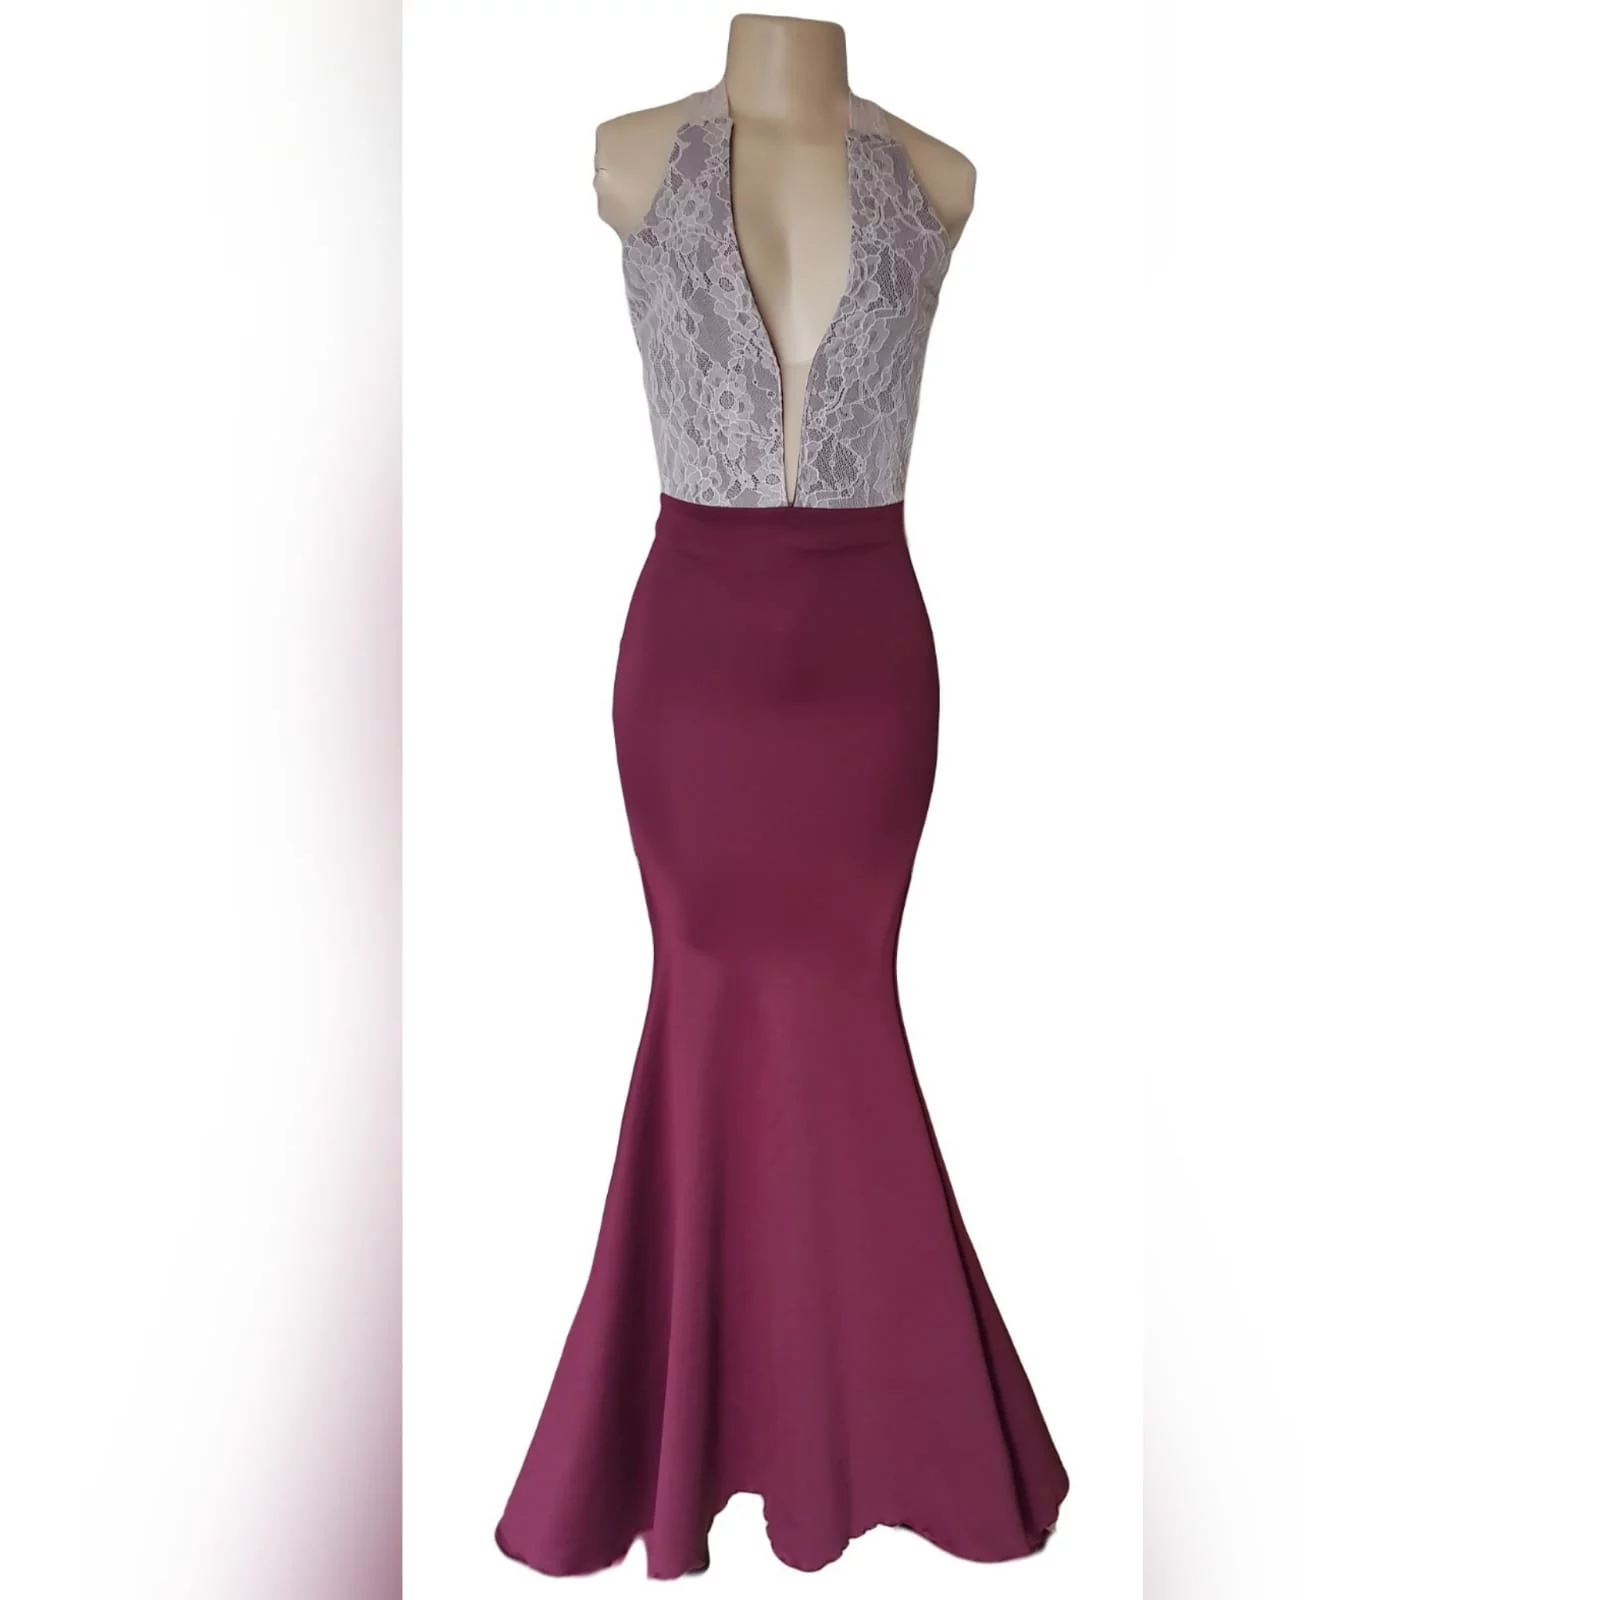 Simple elegant soft mermaid maroon prom dress 1 <blockquote>"you were born to stand out, stop trying to fit in". Roy t. Bennett</blockquote> simple elegant soft mermaid matric prom dress with an overlayer of cream lace on the bodice to add a unique touch to the design. Plunging neckline, low open back and lace wide crossed shoulder straps. With a matching lipstick/cellphone bag